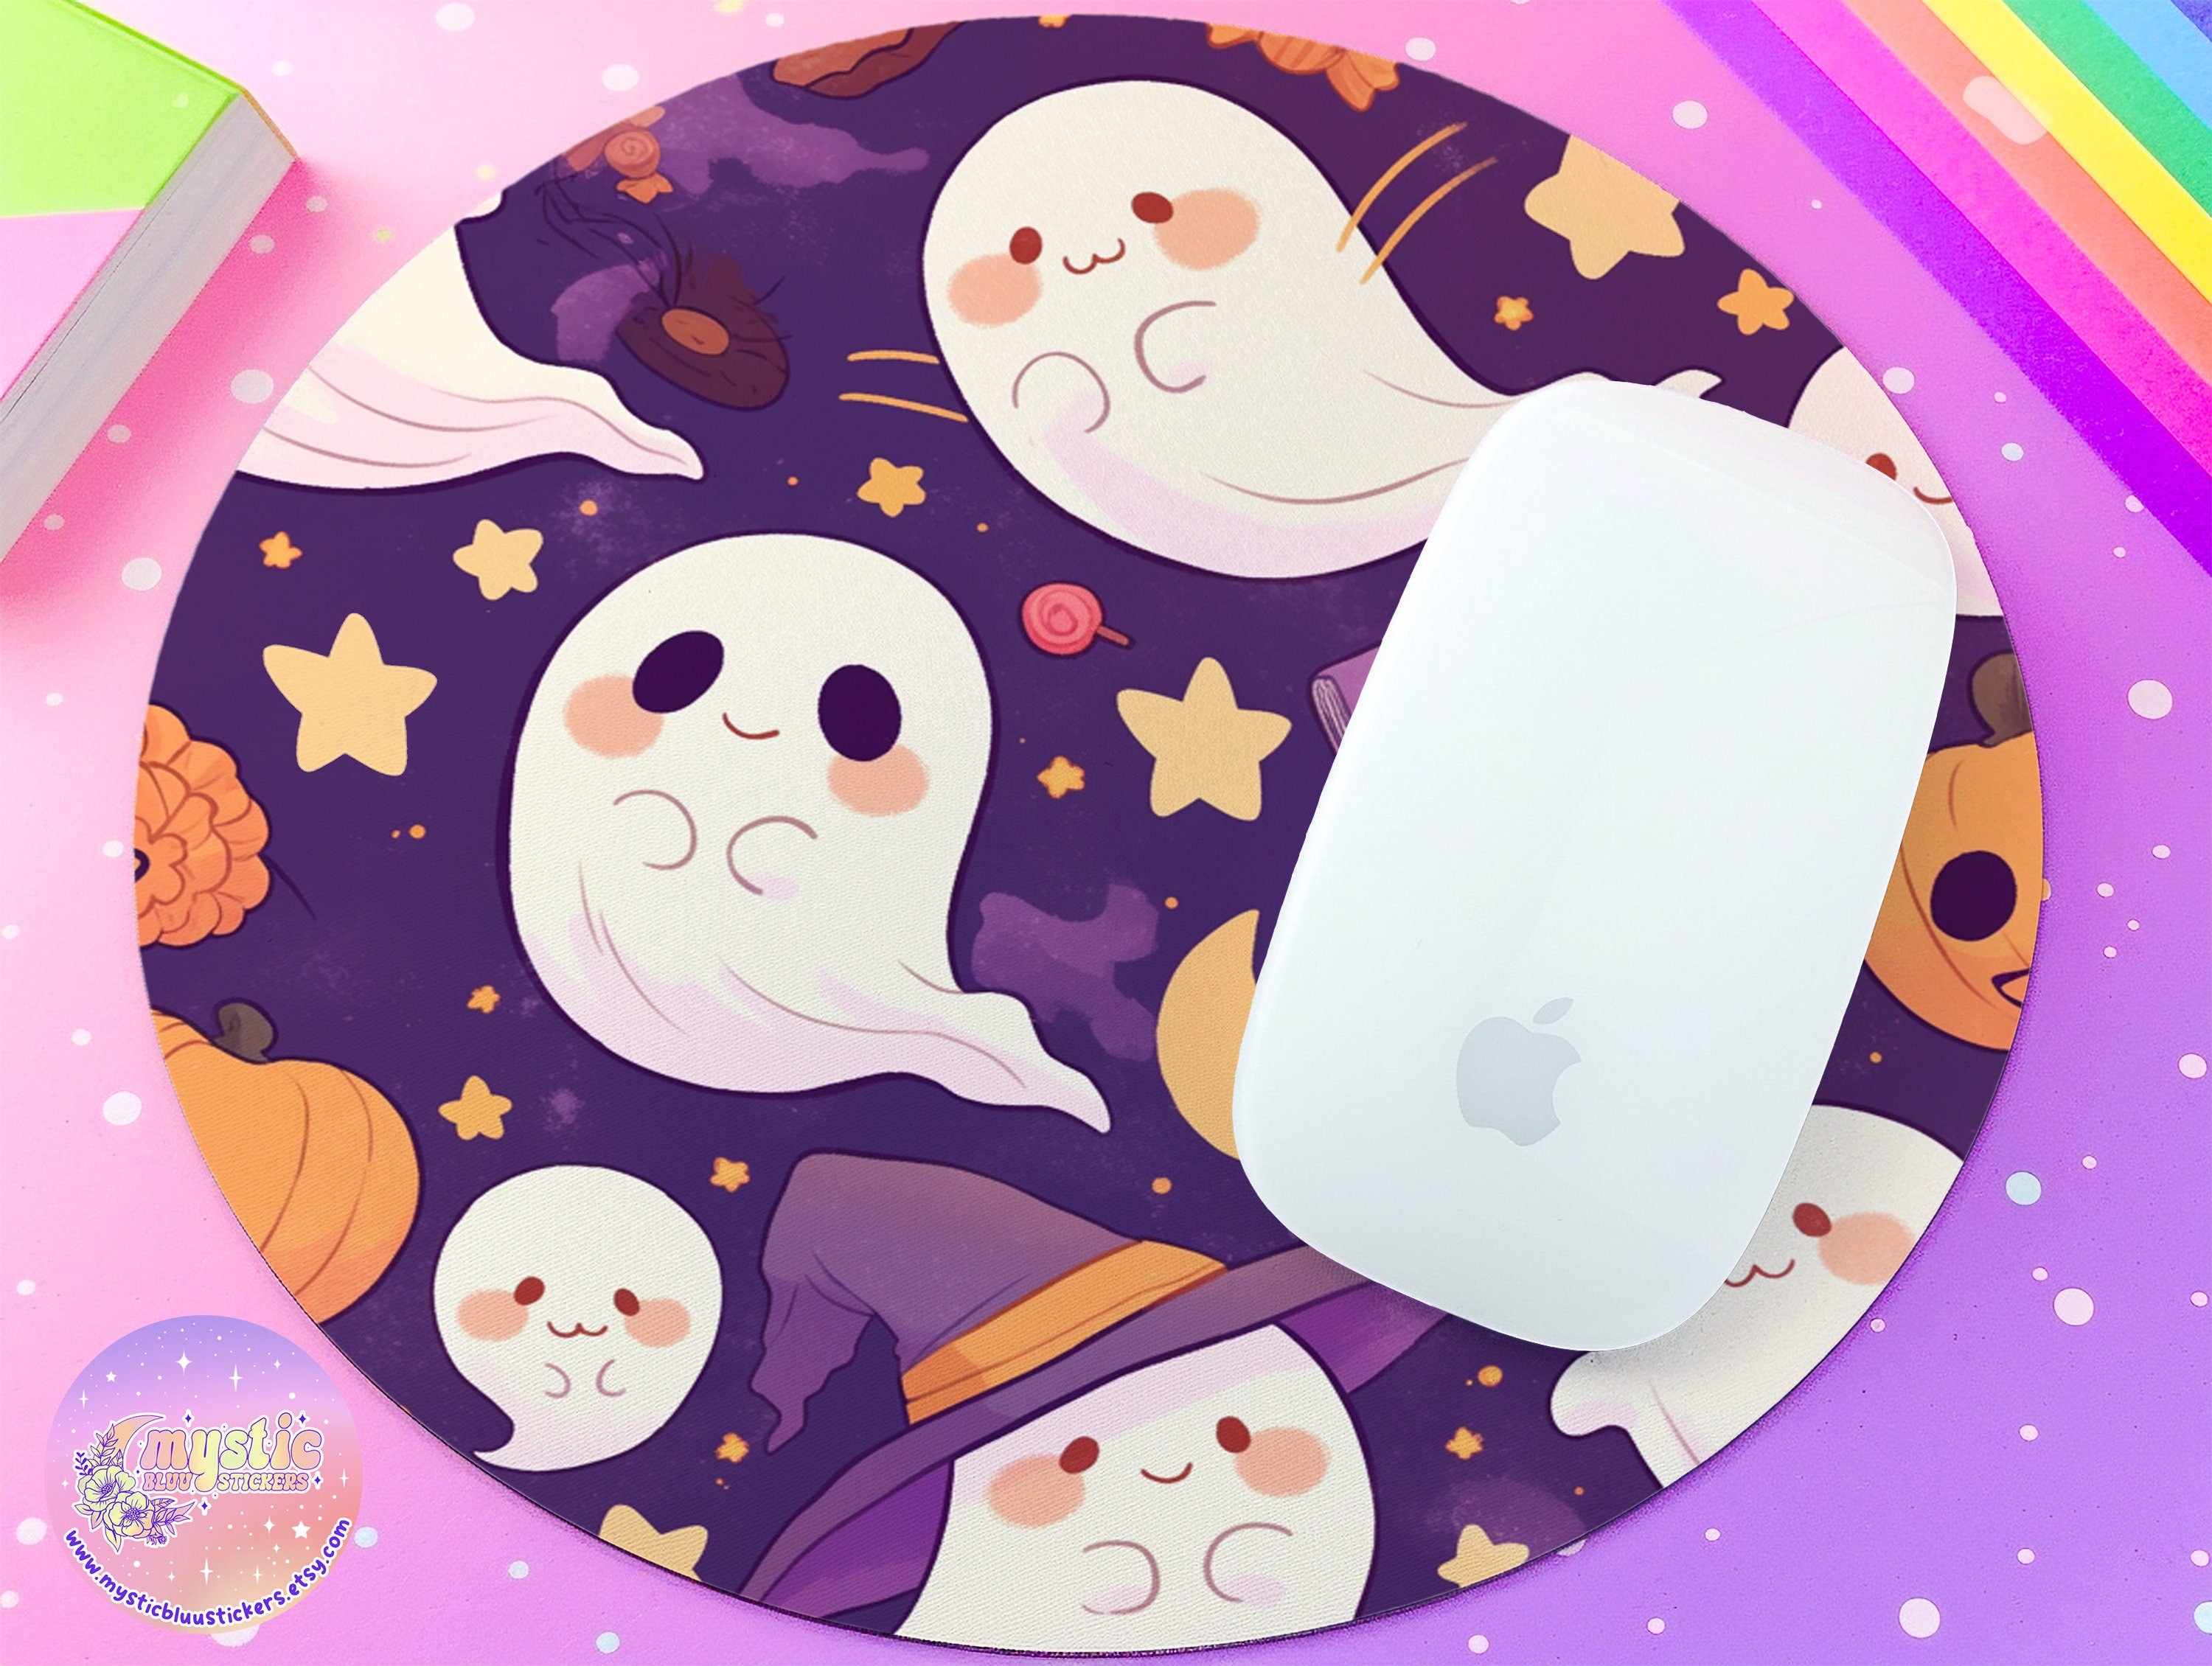 esthetic Ghost Mousepad with Pumpkins and Autumn Leaves - Kawaii Decor